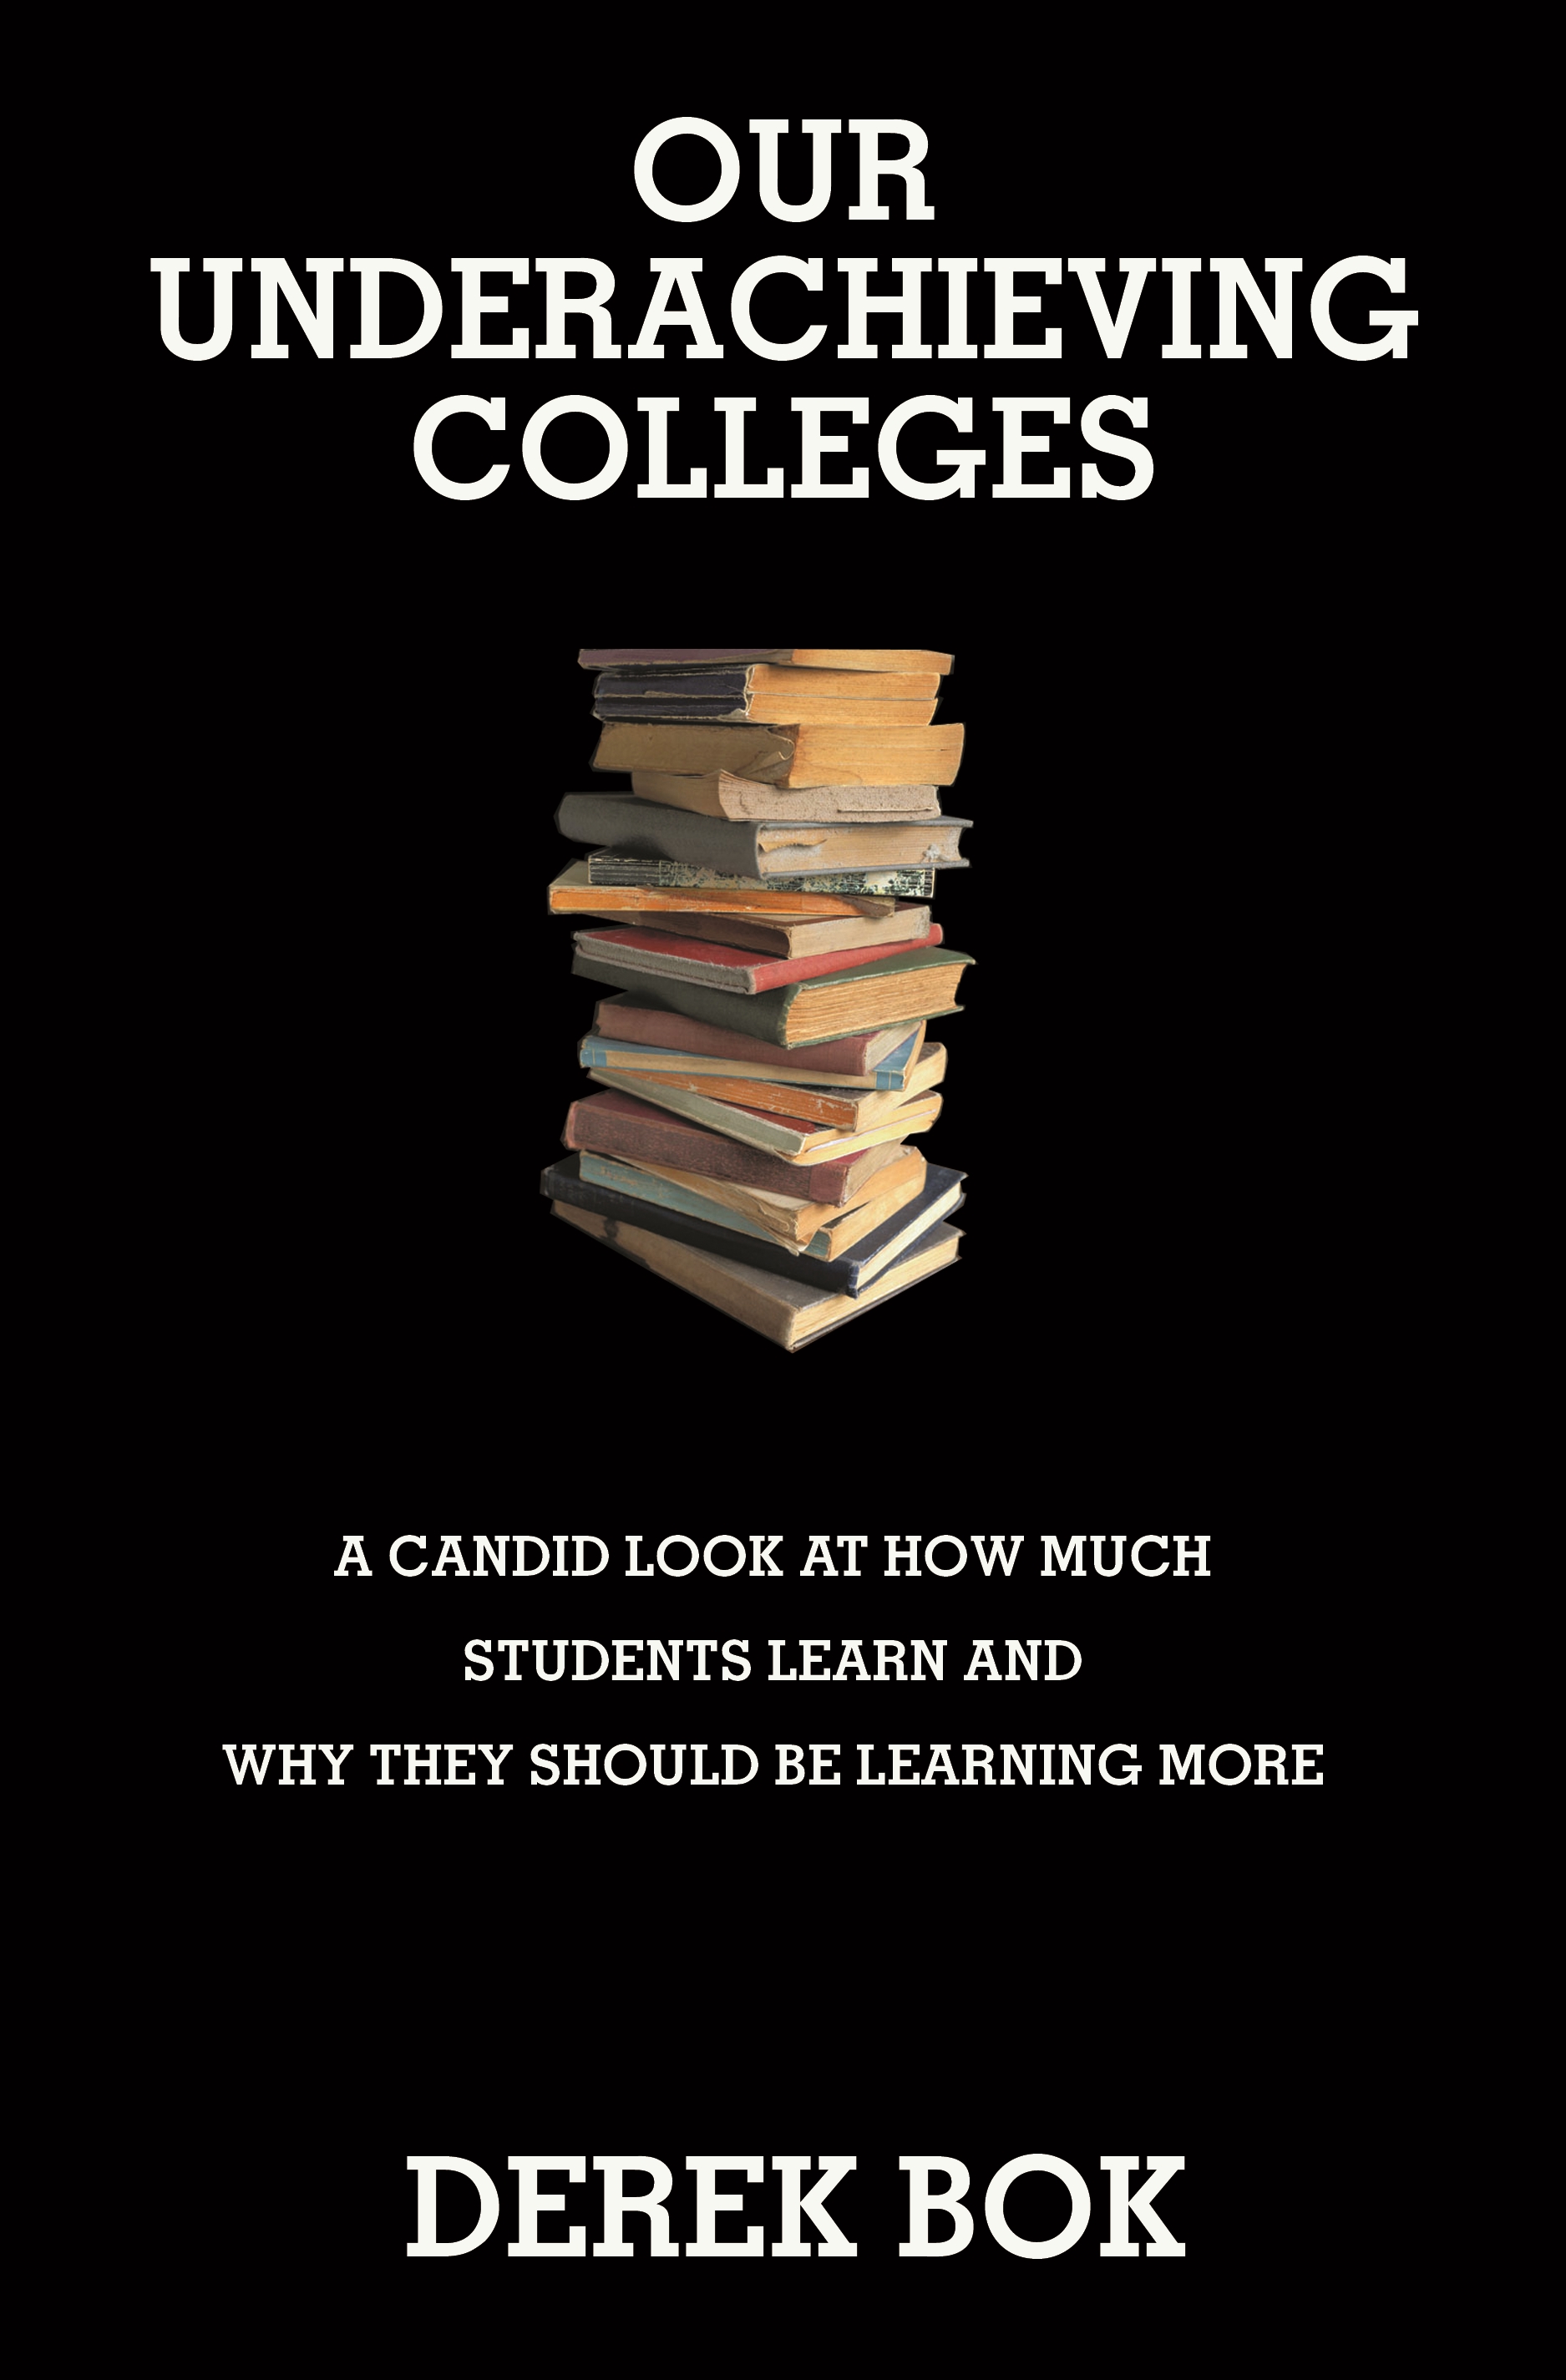 Our Underachieving Colleges: A candid look at how much students learn and why they should be learning more